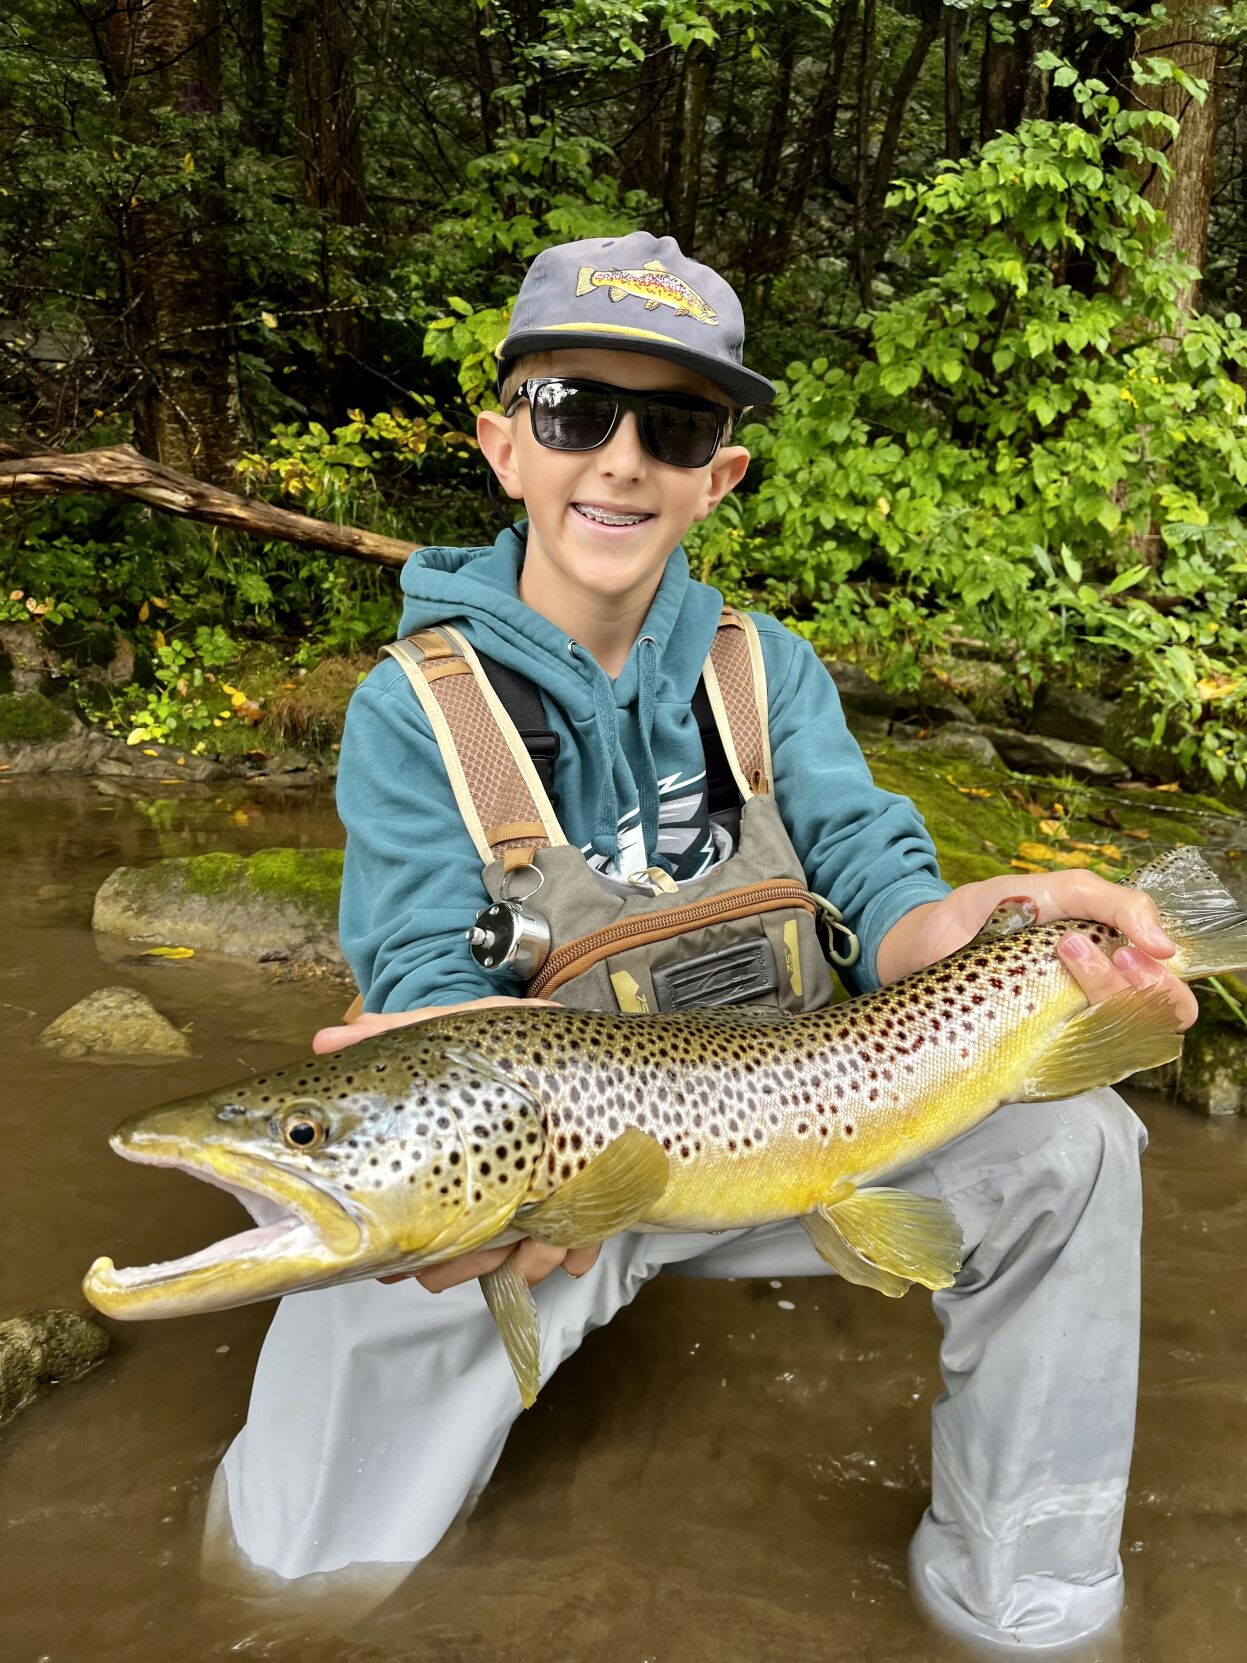 Lancaster County boy, youngest member of U.S. Angling team